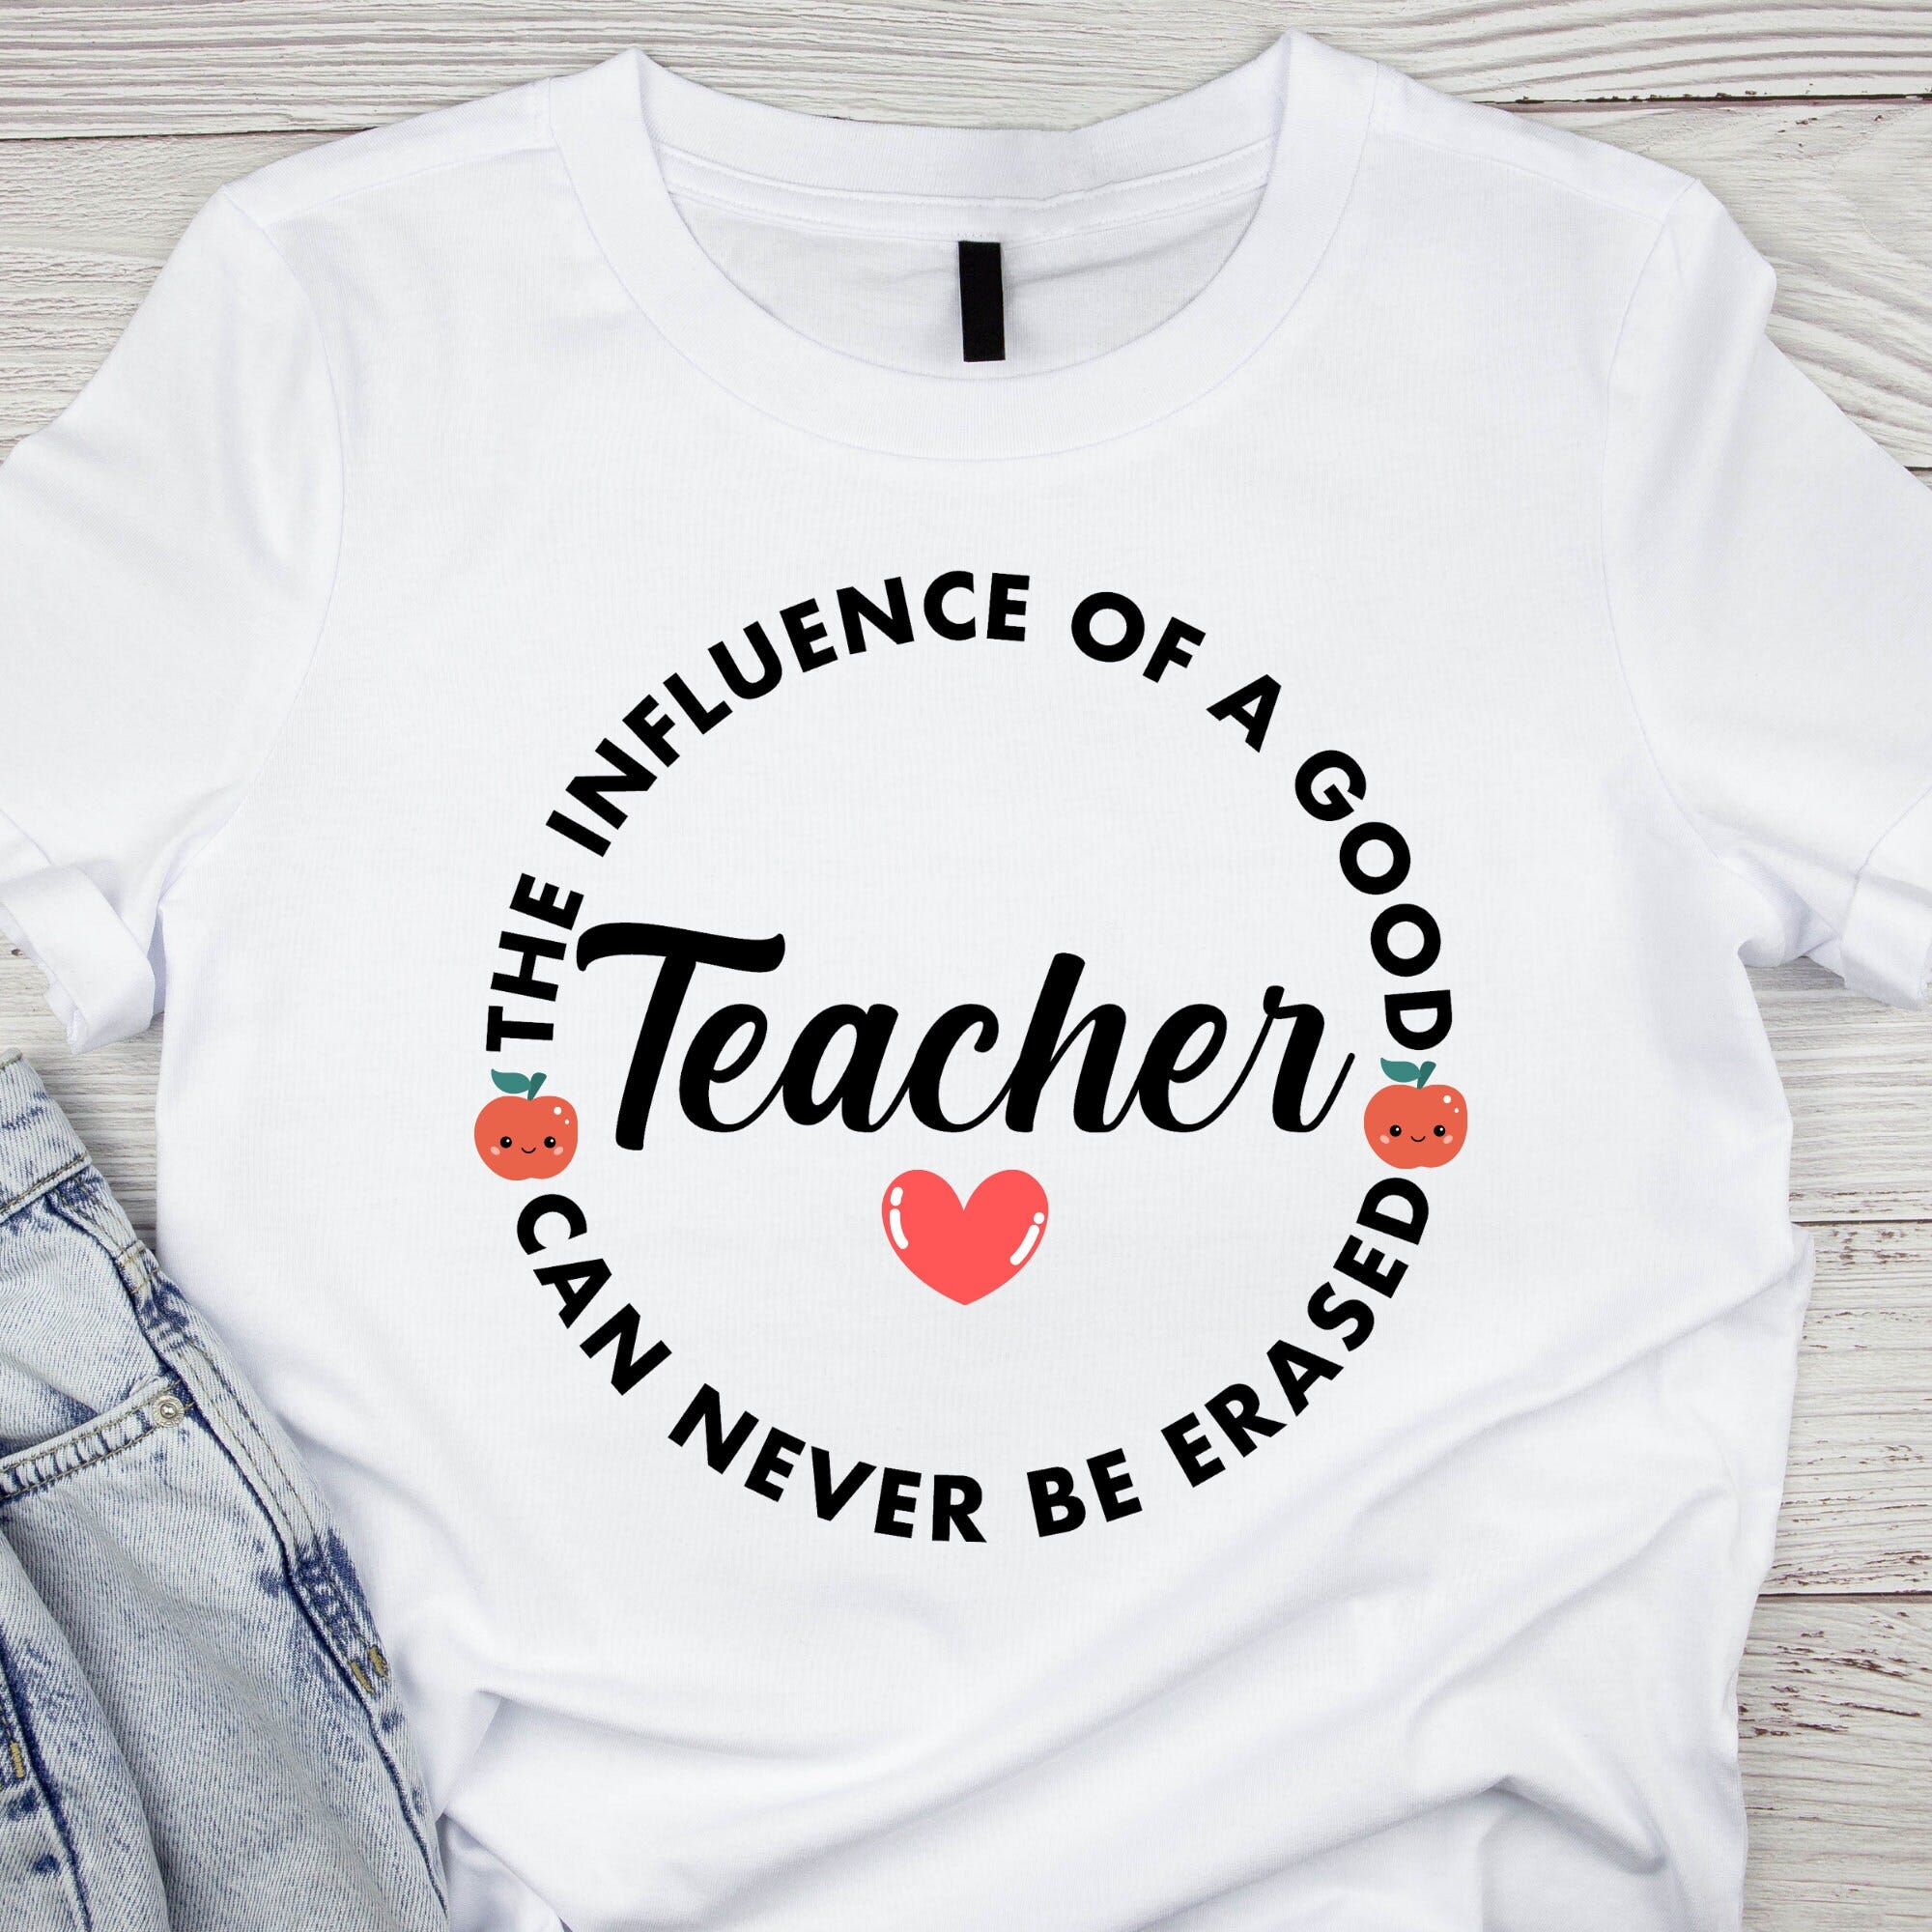 Influence Of A Good Teacher Can Never Be Erased, PNG, SVG, Instant Download, Digital File